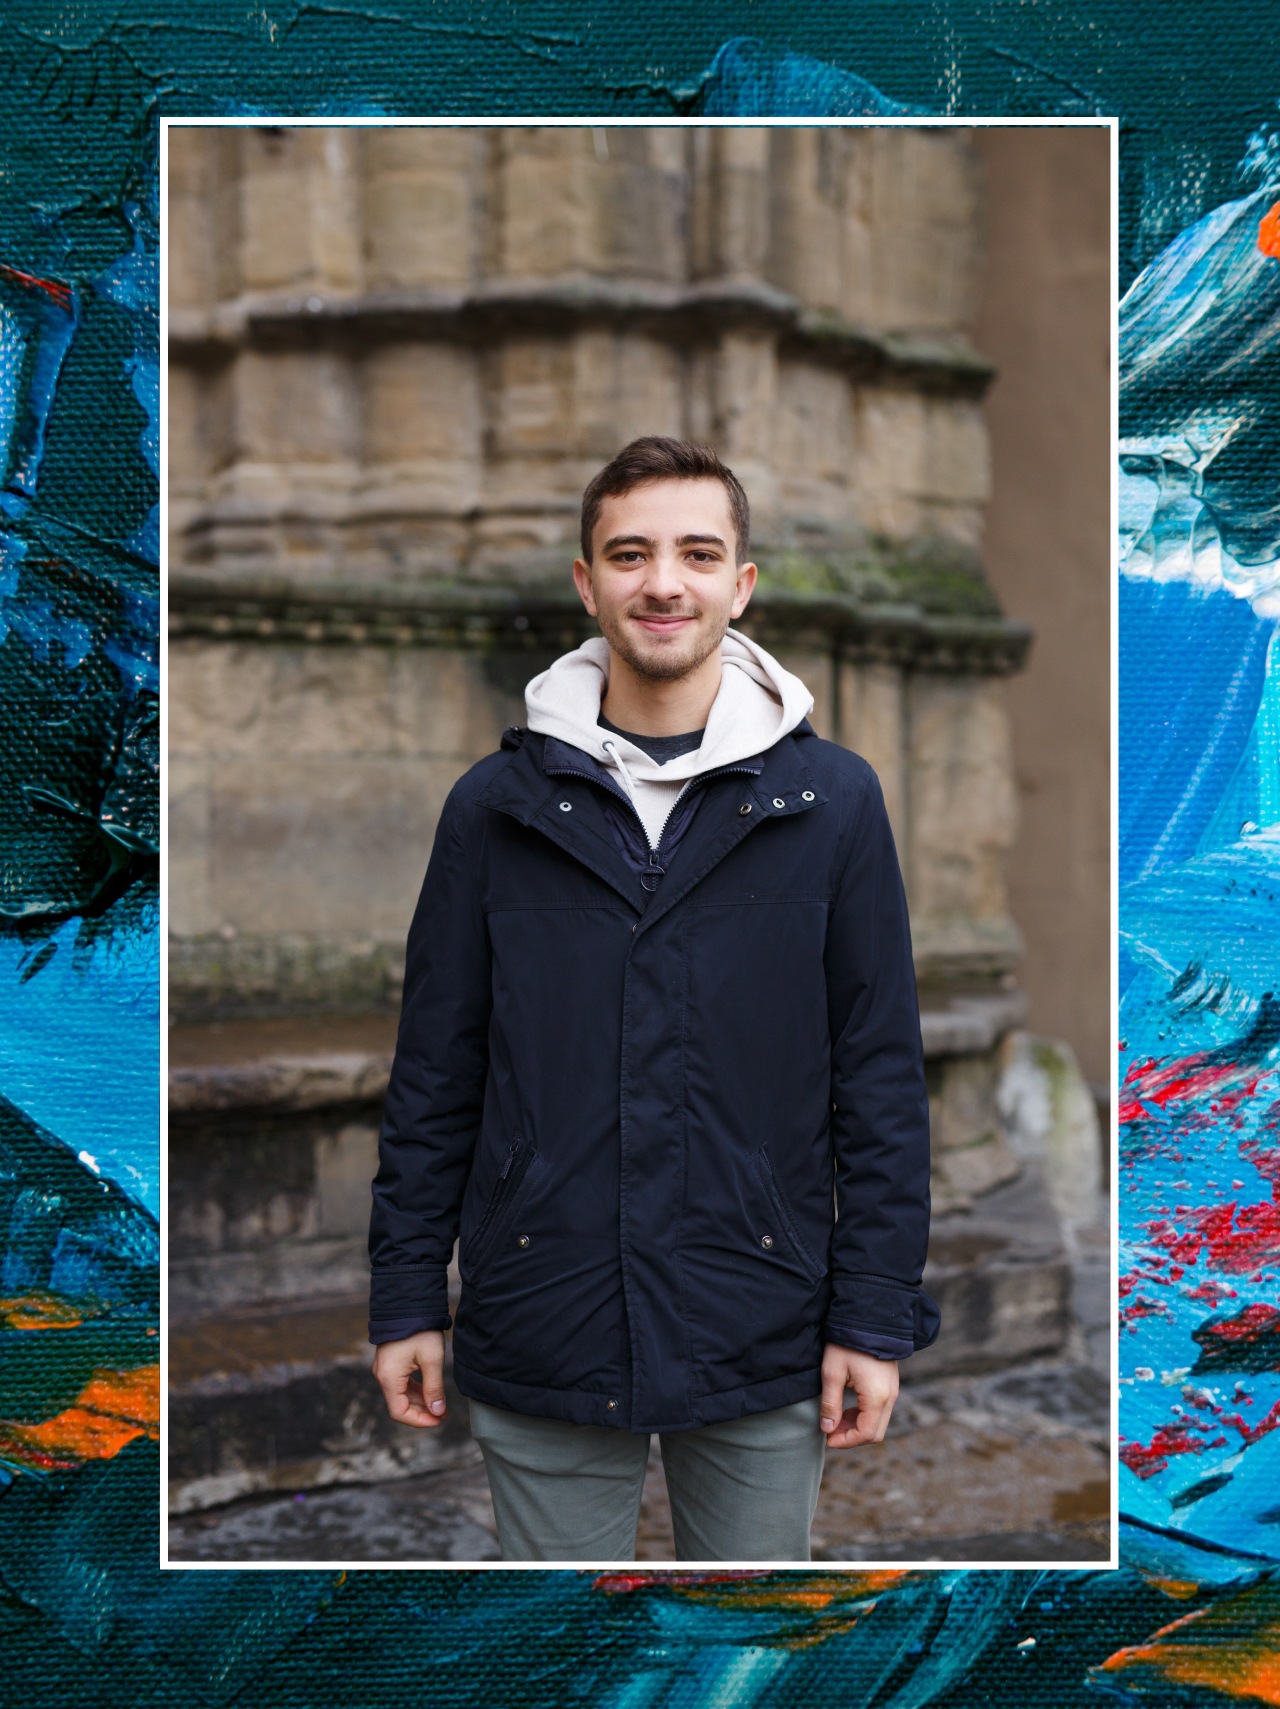 A collage: 1) Mauro standing in front of an older looking piece of architecture. 2) A blue, red, and orange work of abstract art.